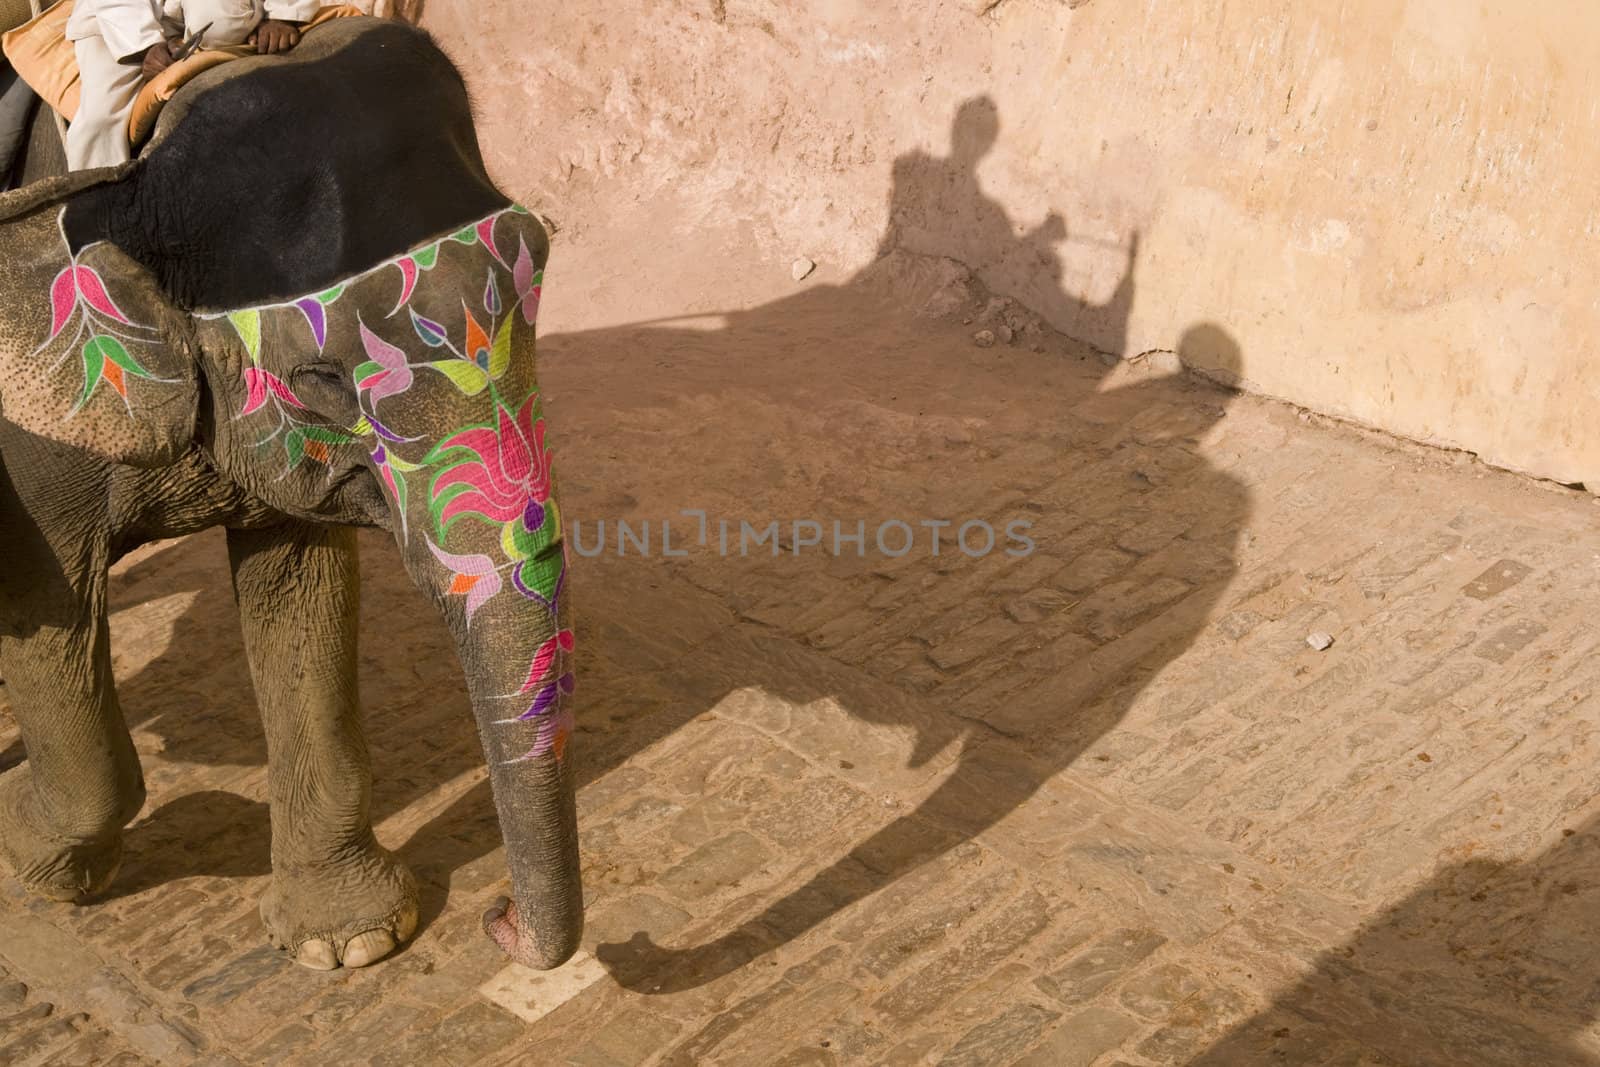 Decorated elephant transporting tourists to Amber Fort, Jaipur, Rajasthan, India.